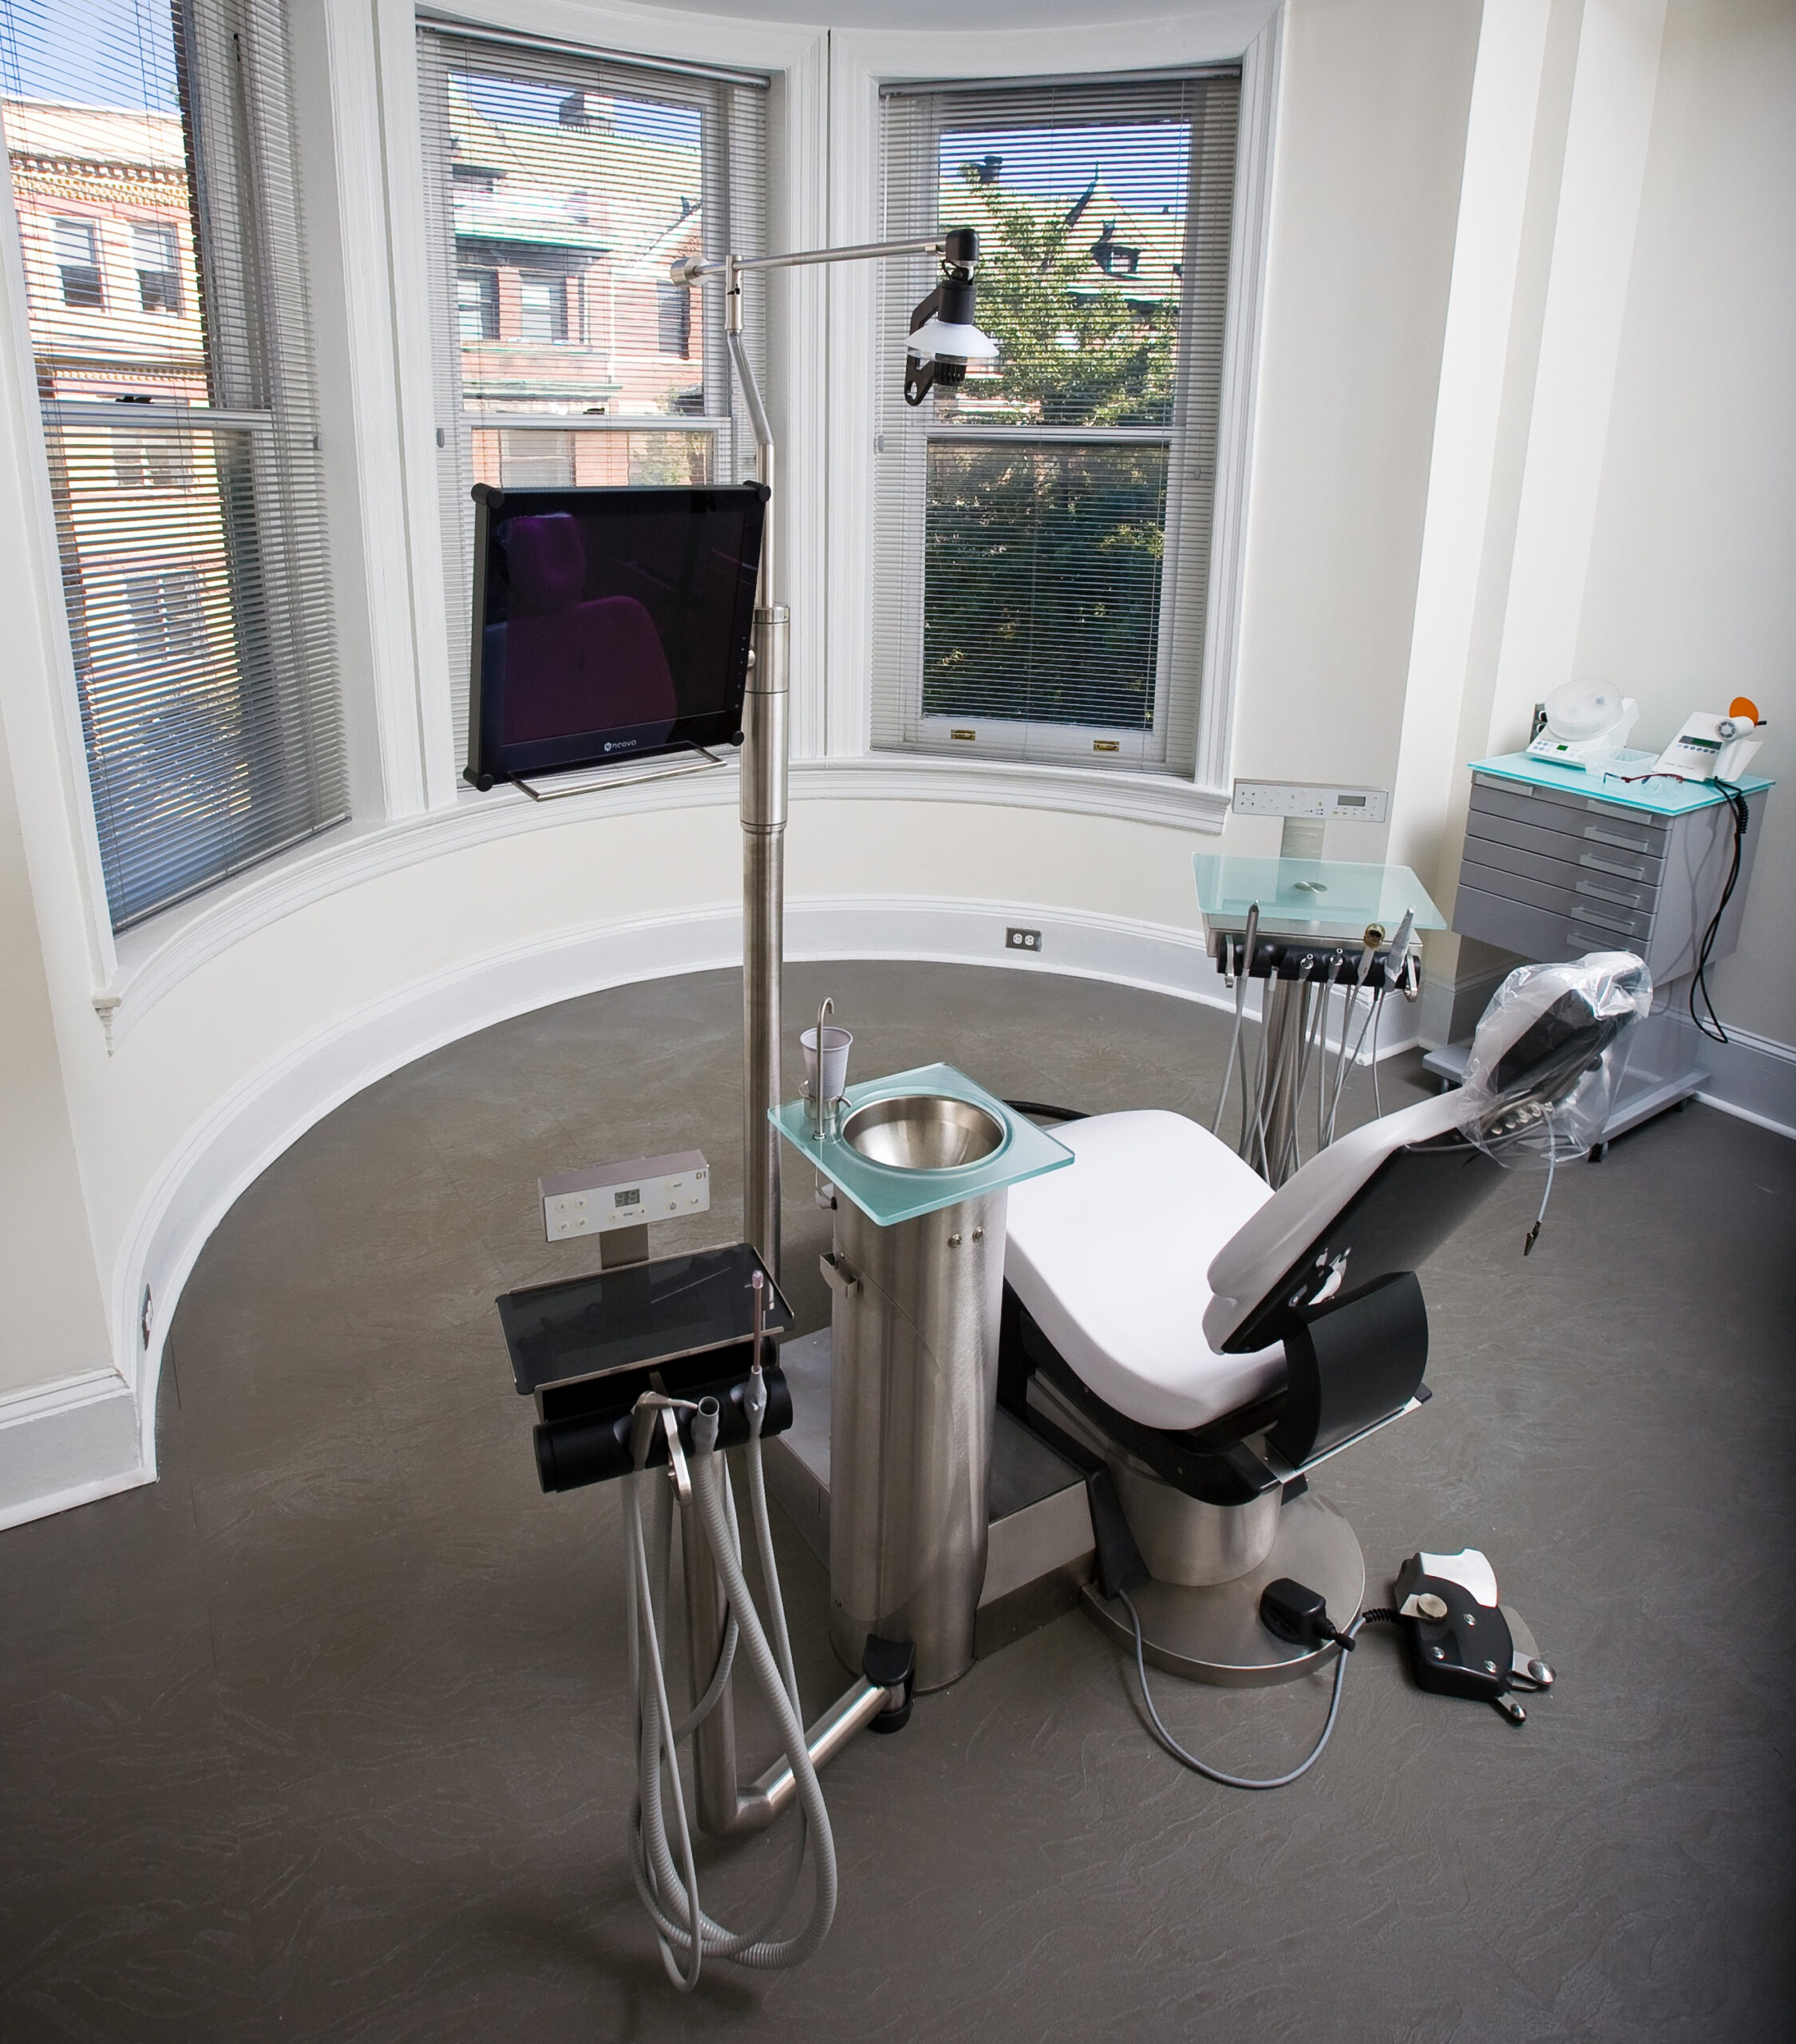 AIID Full Mouth Dental Implant Office. American Institute of Implant Dentistry